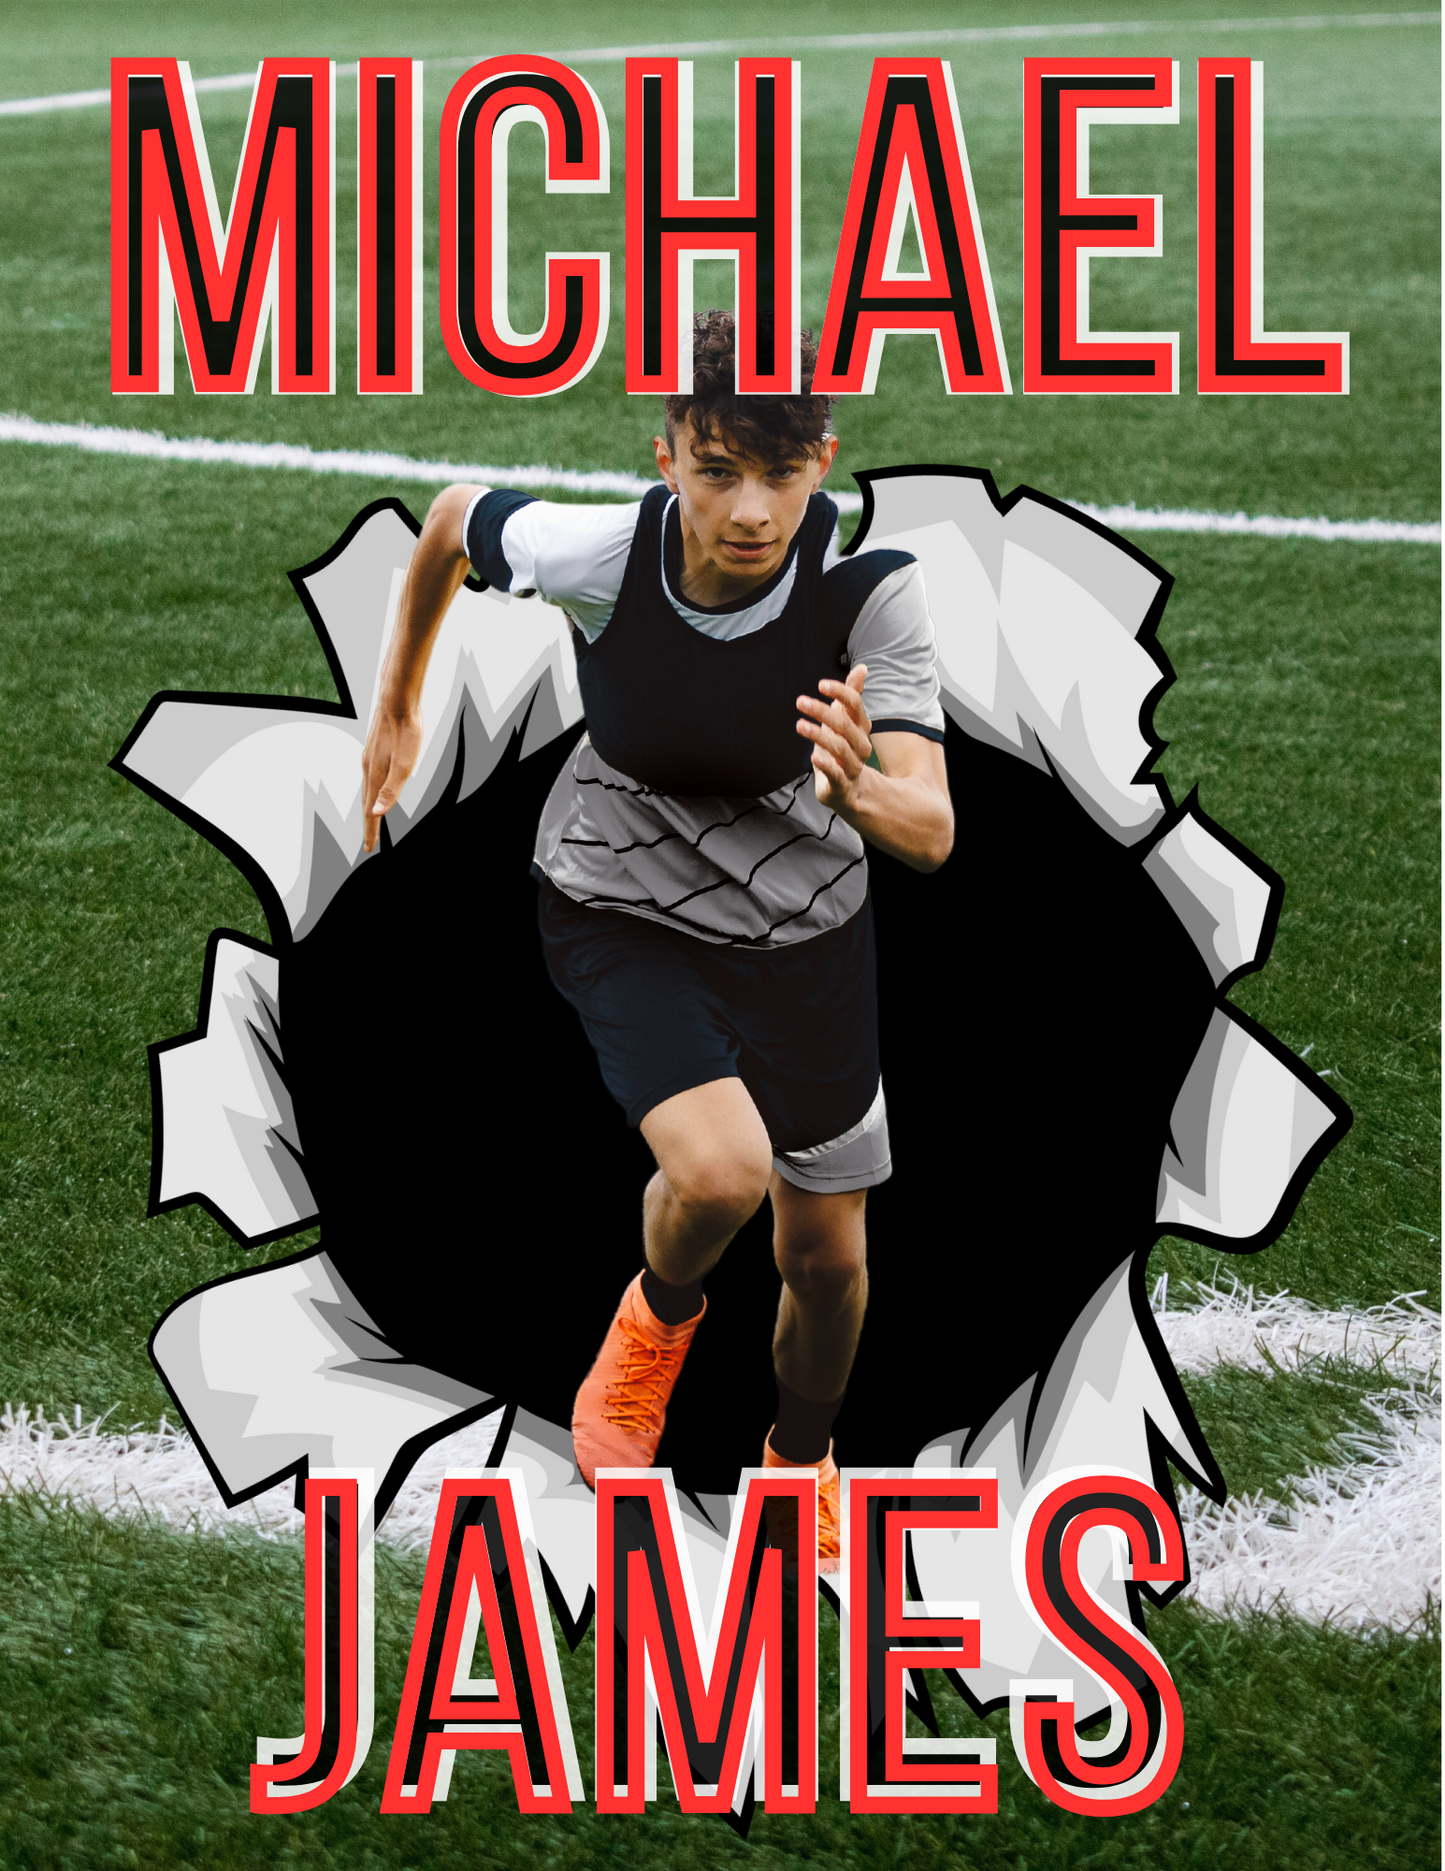 Soccer Player Trading Card Templates Bundle